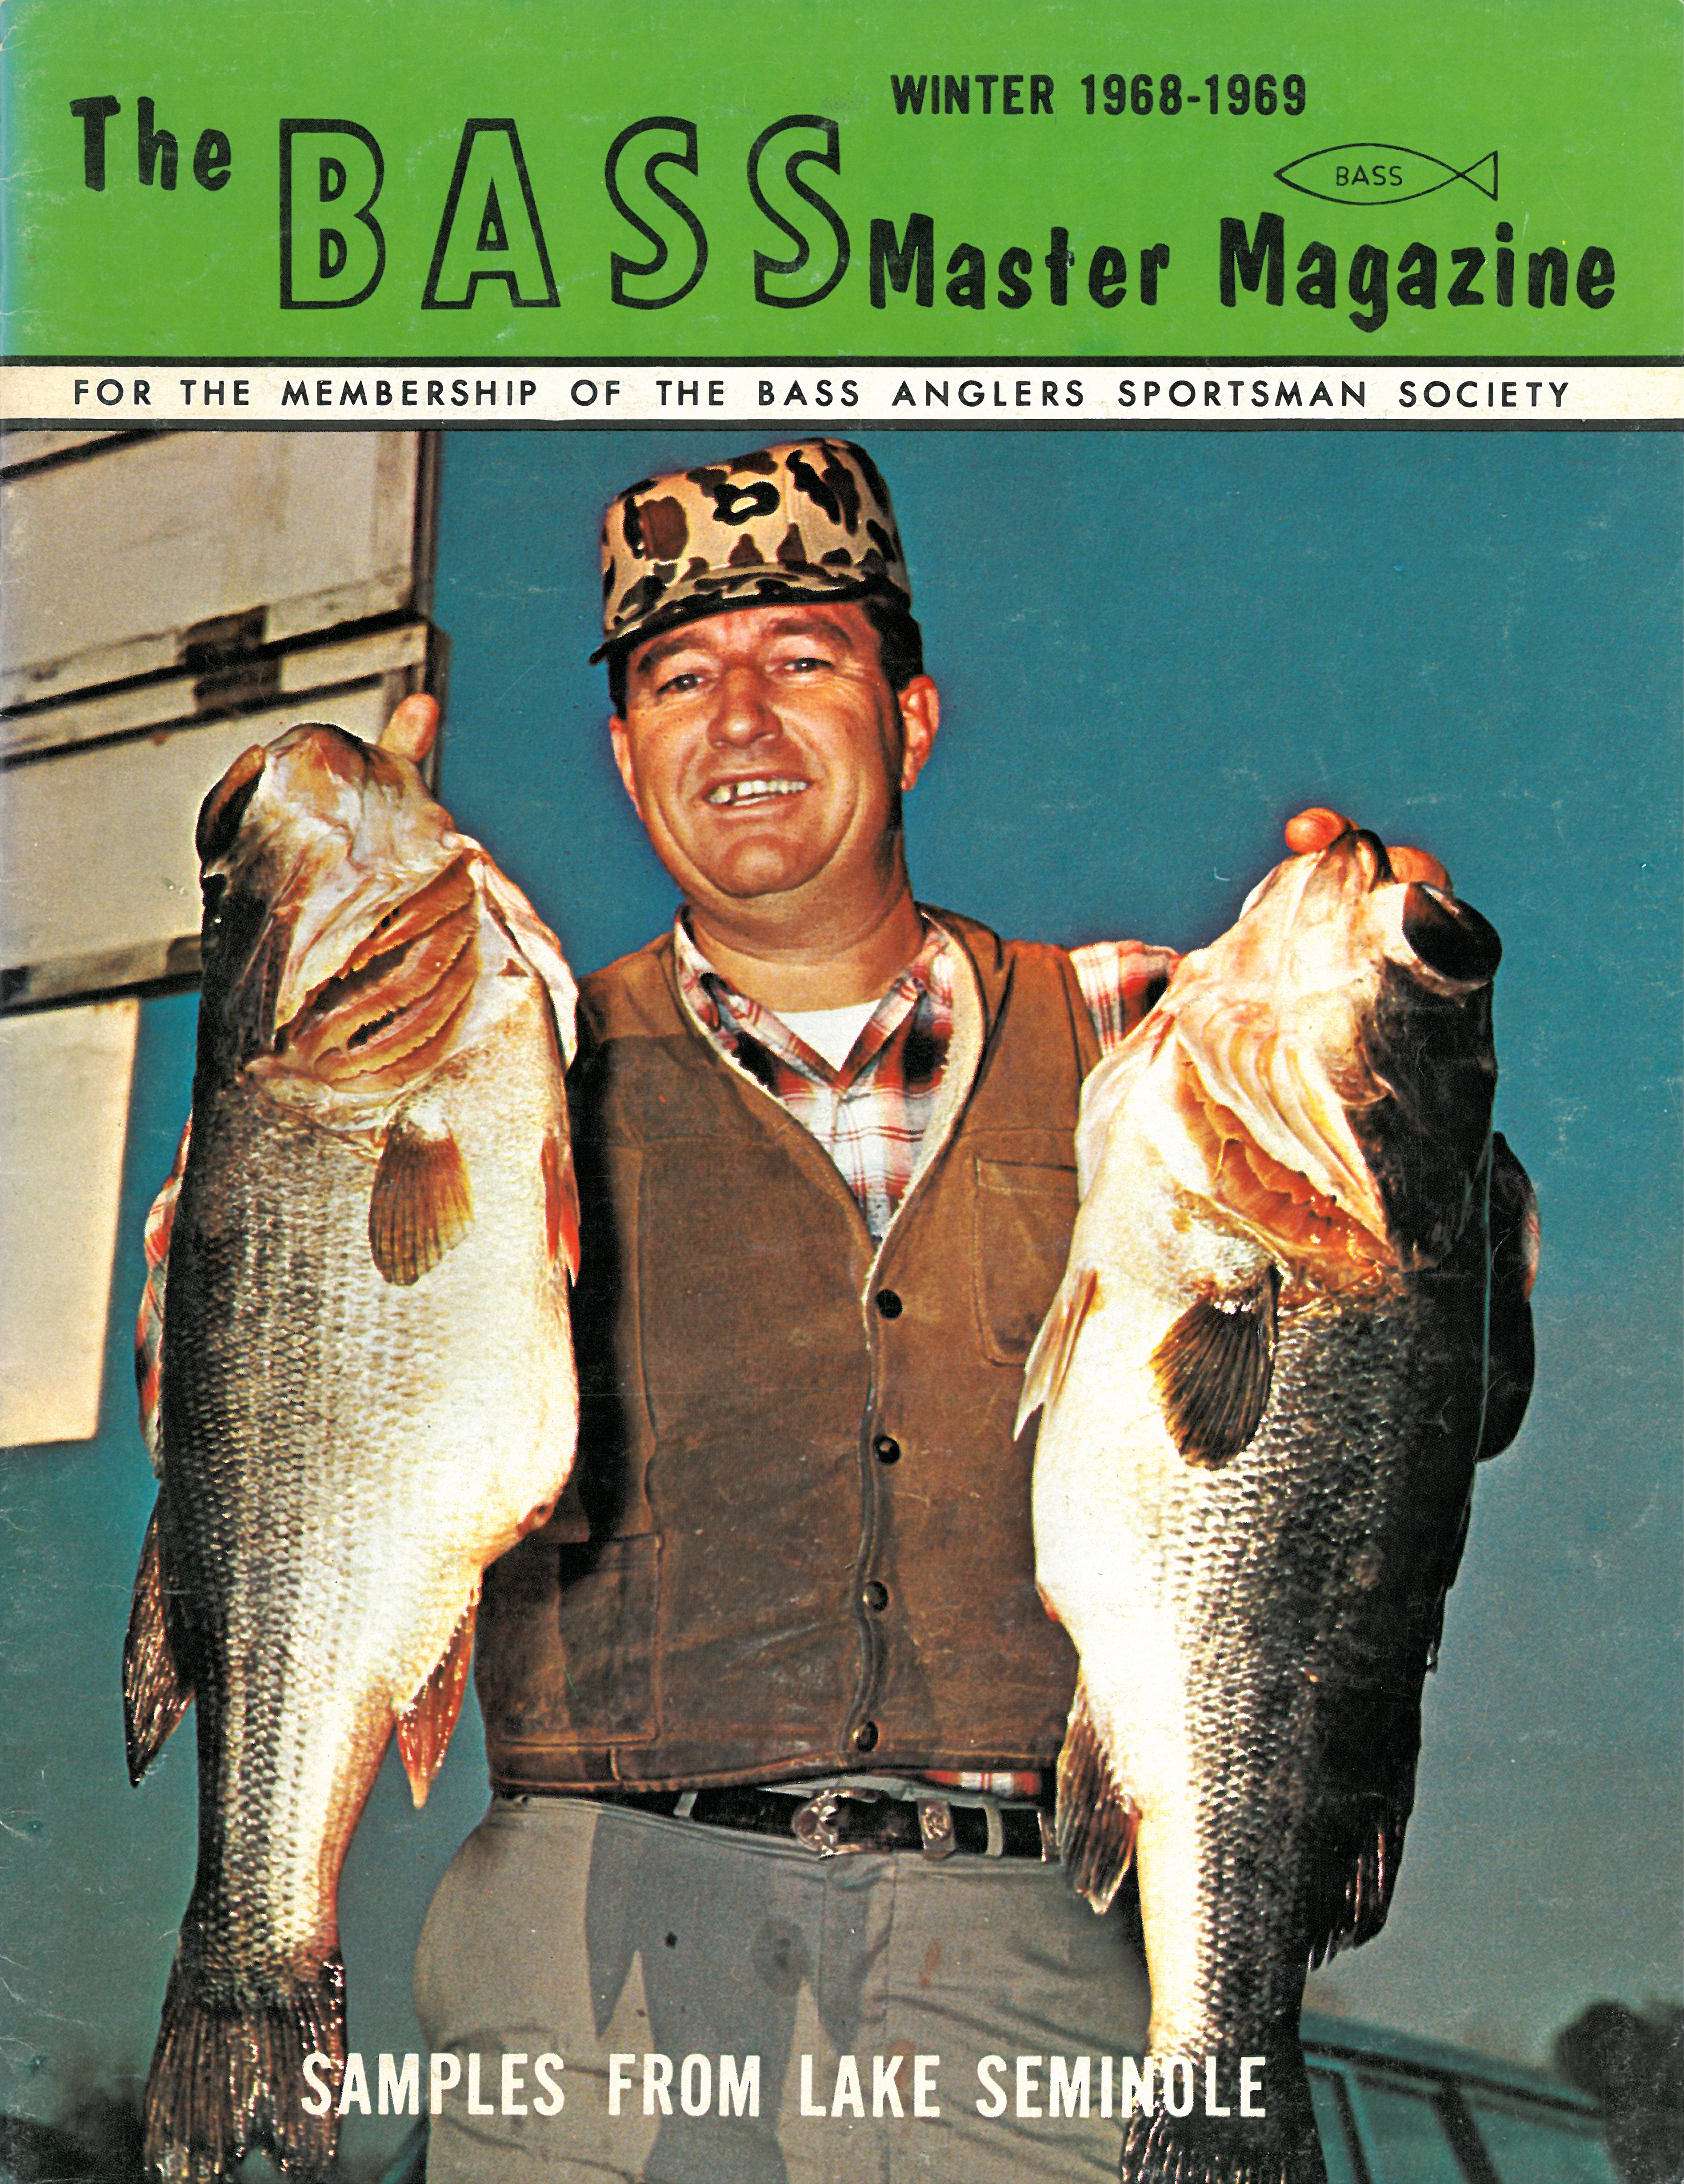 The Winter 1968-1969 cover shows off fish from the first Seminole B.A.S.S. tournament held in 1968.